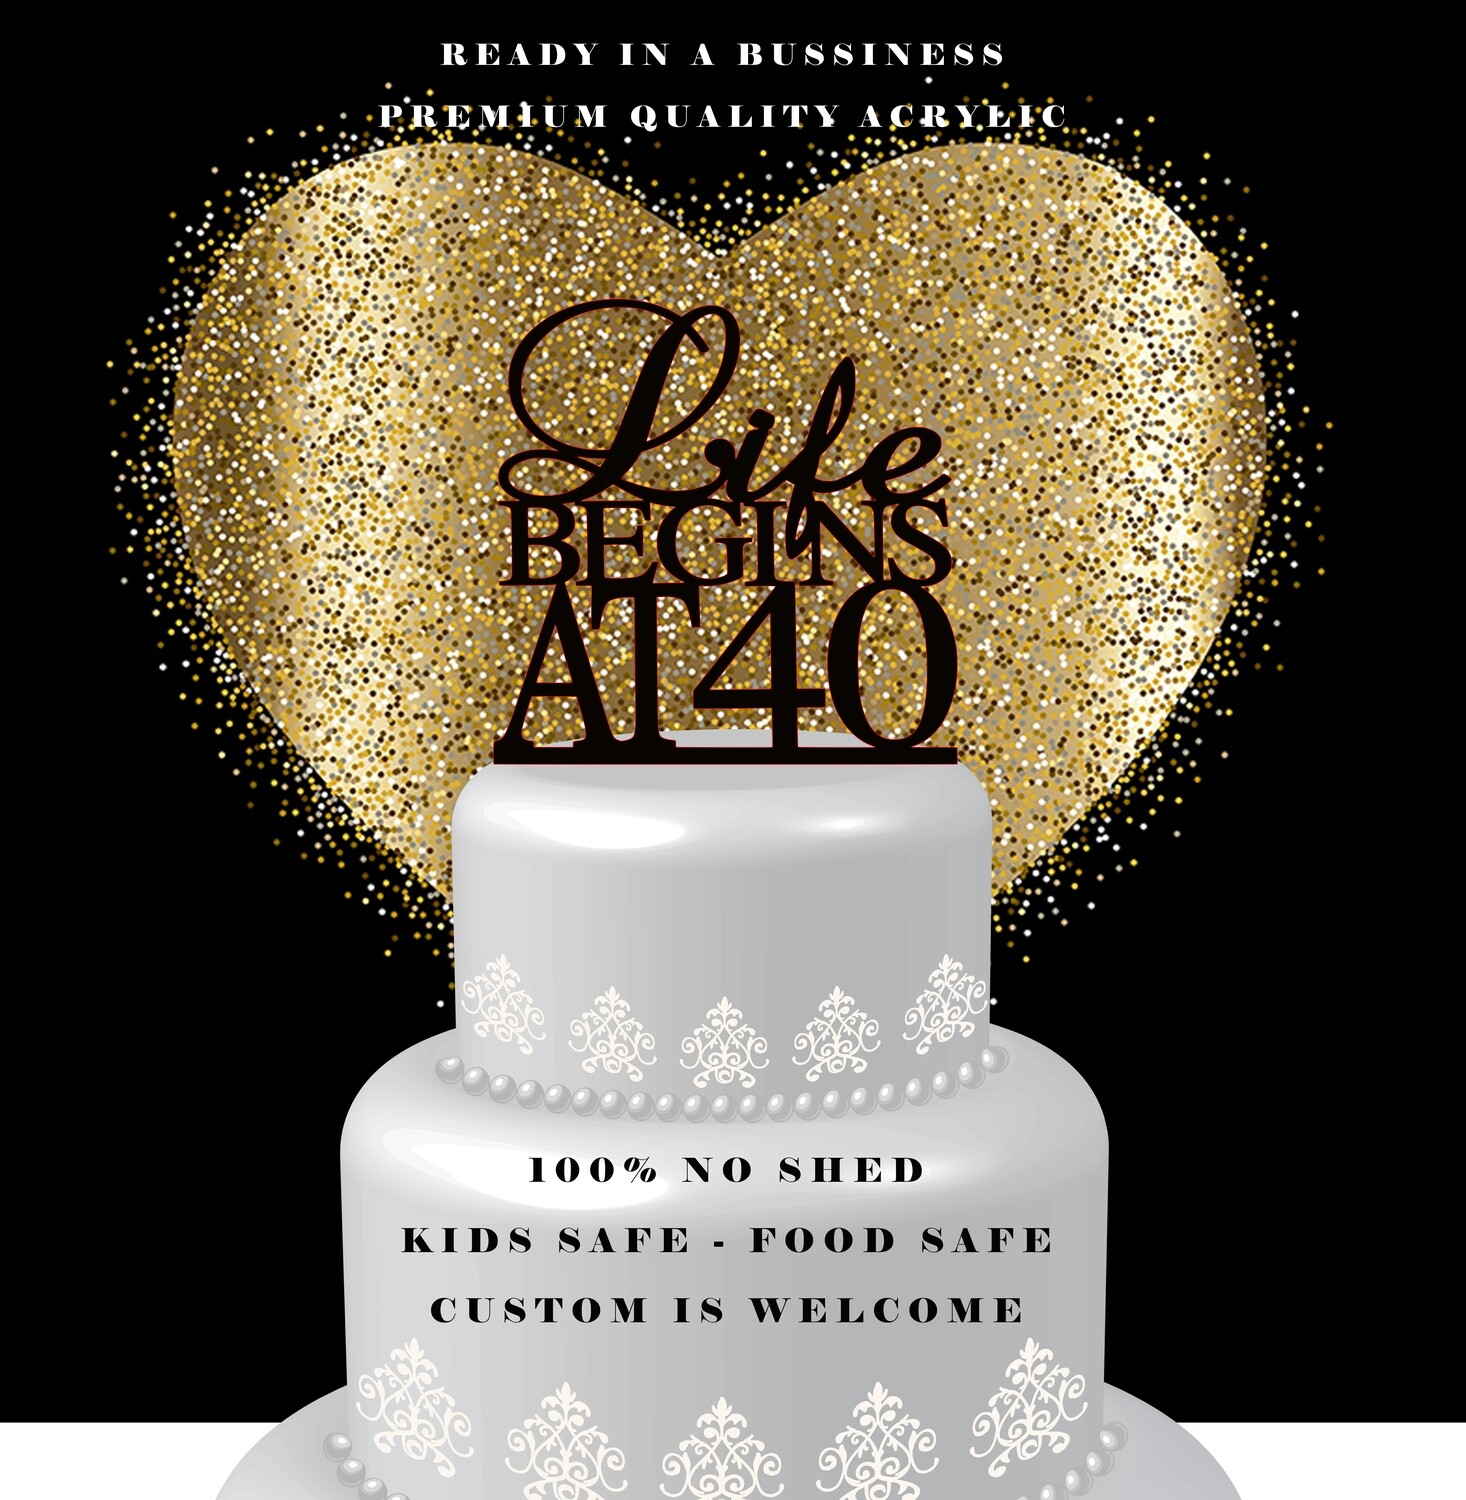 GOLD LIFE BEGINS AT 40 CAKE TOPPER, 40TH BIRTHDAY CAKE TOPPER, 40TH PARTY DECOR, FORTIETH CAKE TOPPER, GLAMOUR PARTY DECORATION